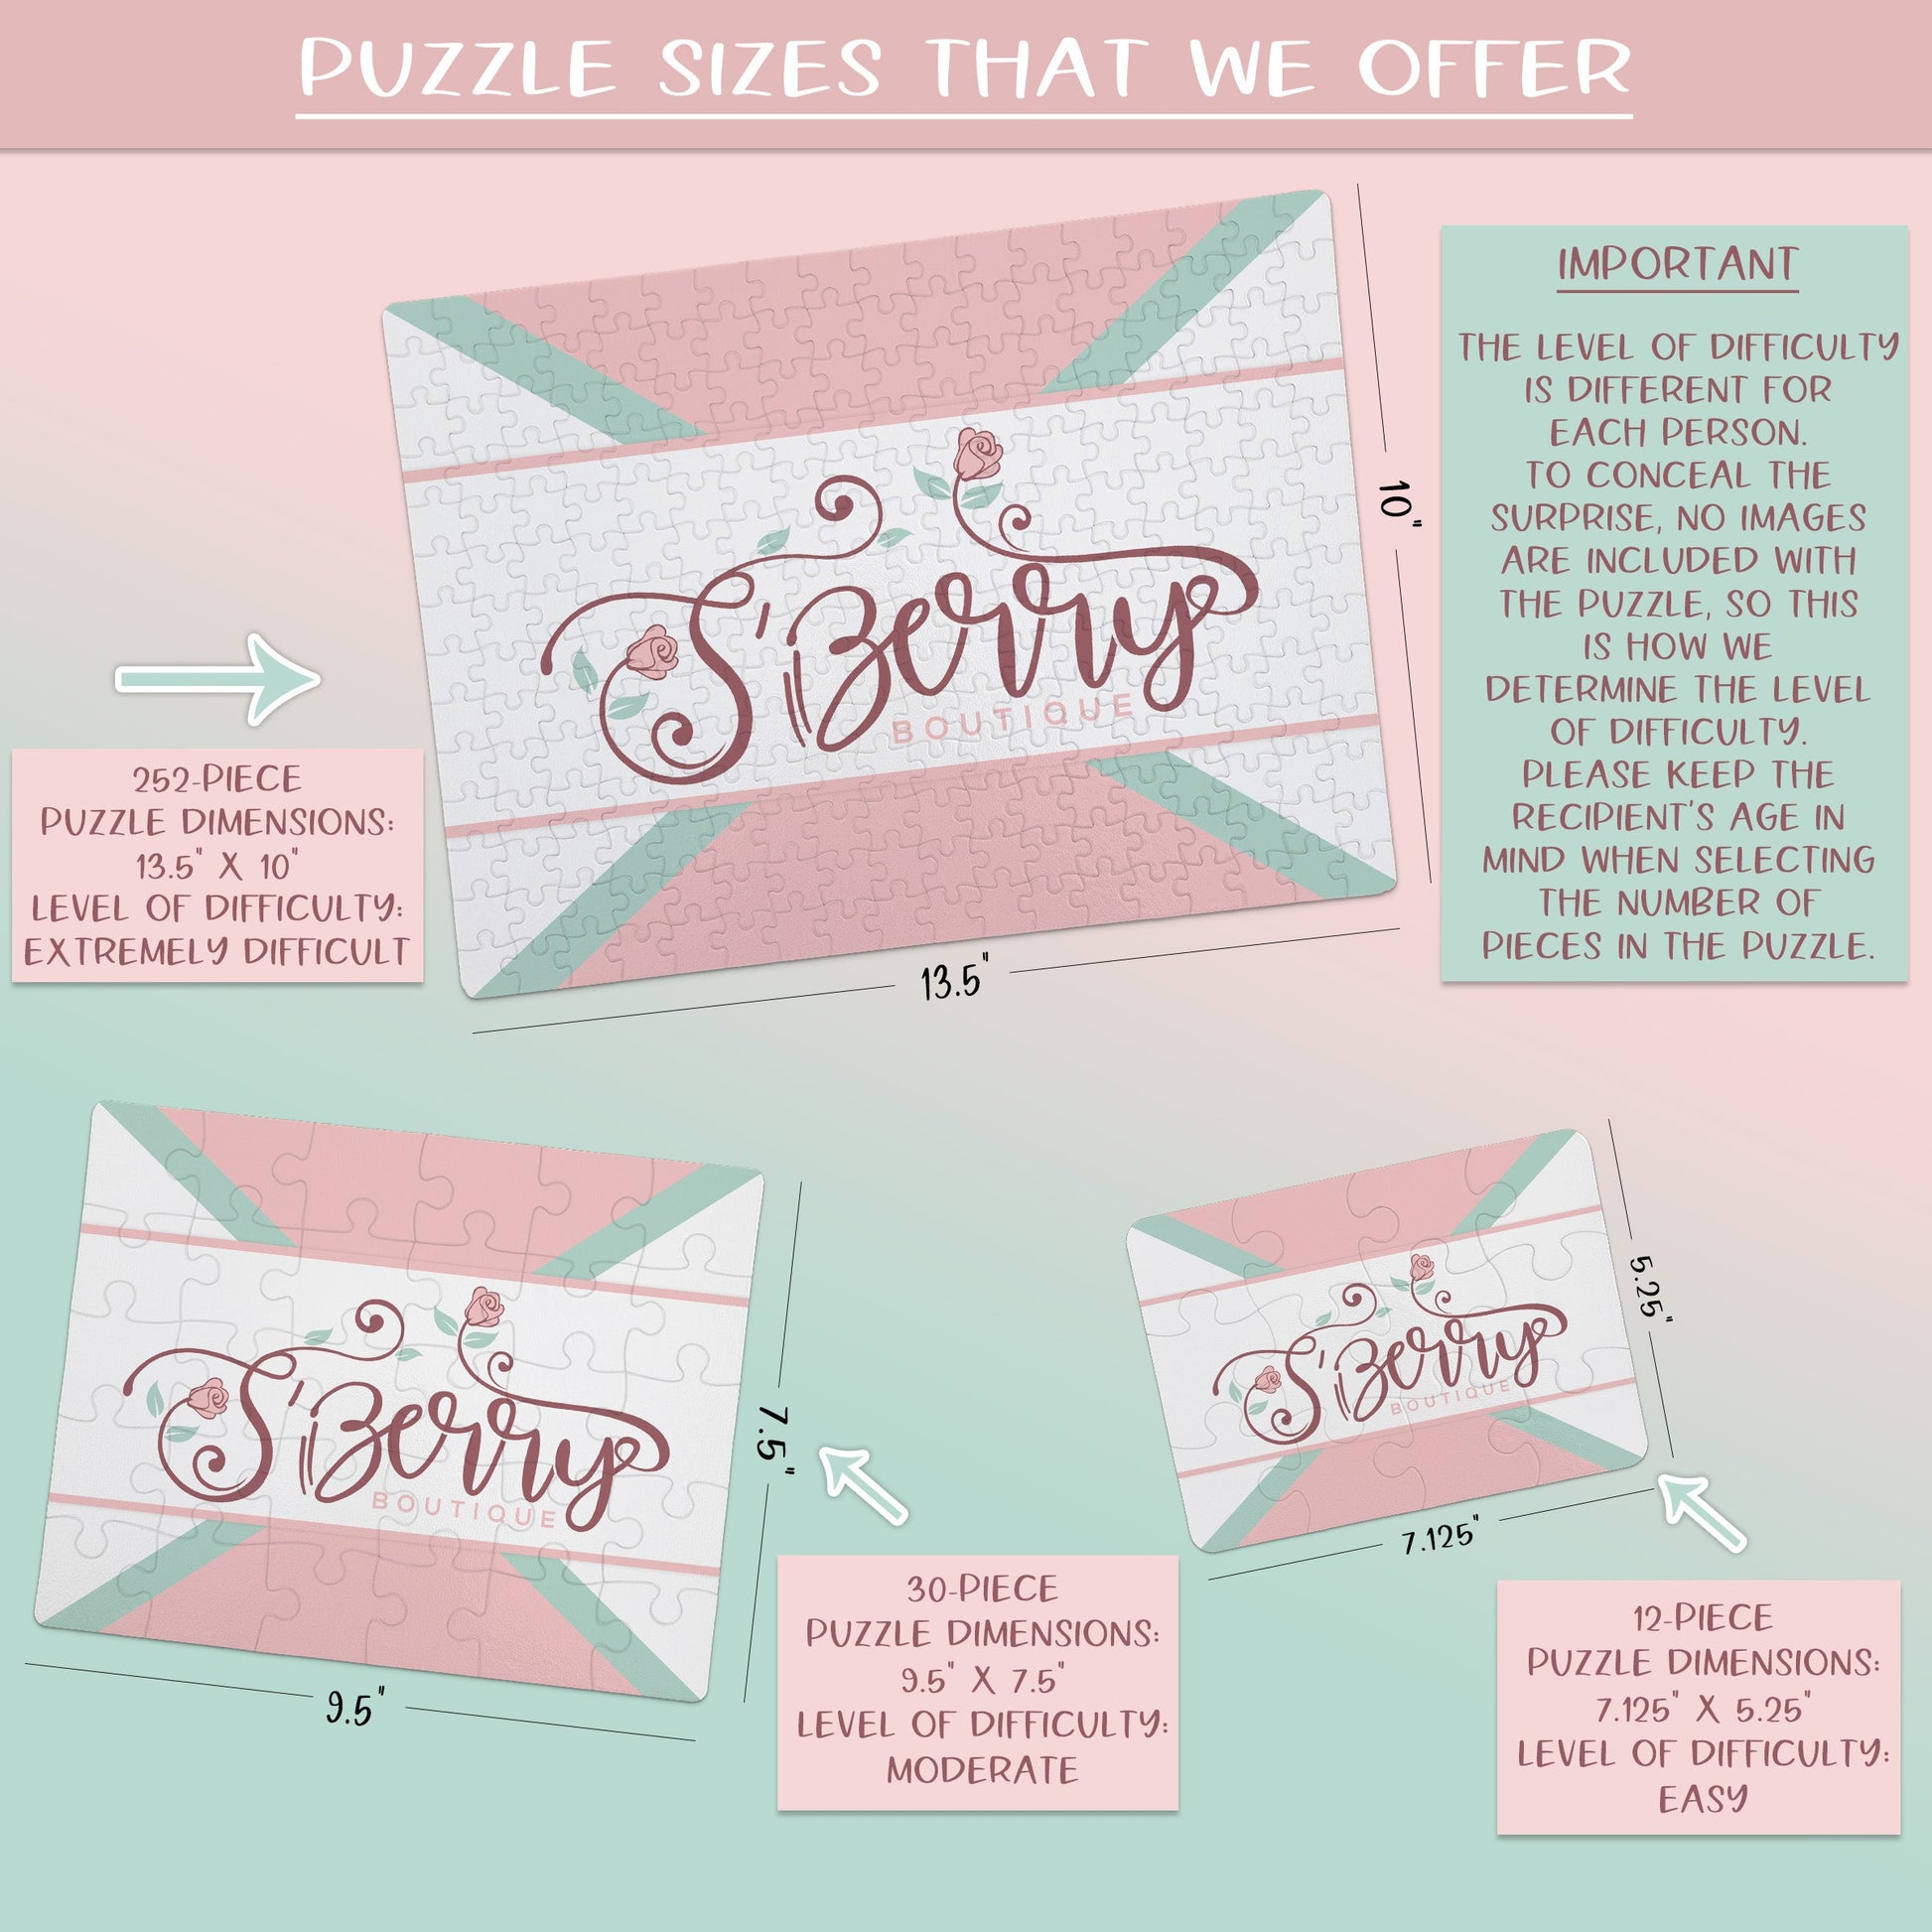 Create Your Own Puzzle - Sports Design - Baseball - CYOP0261 | S'Berry Boutique